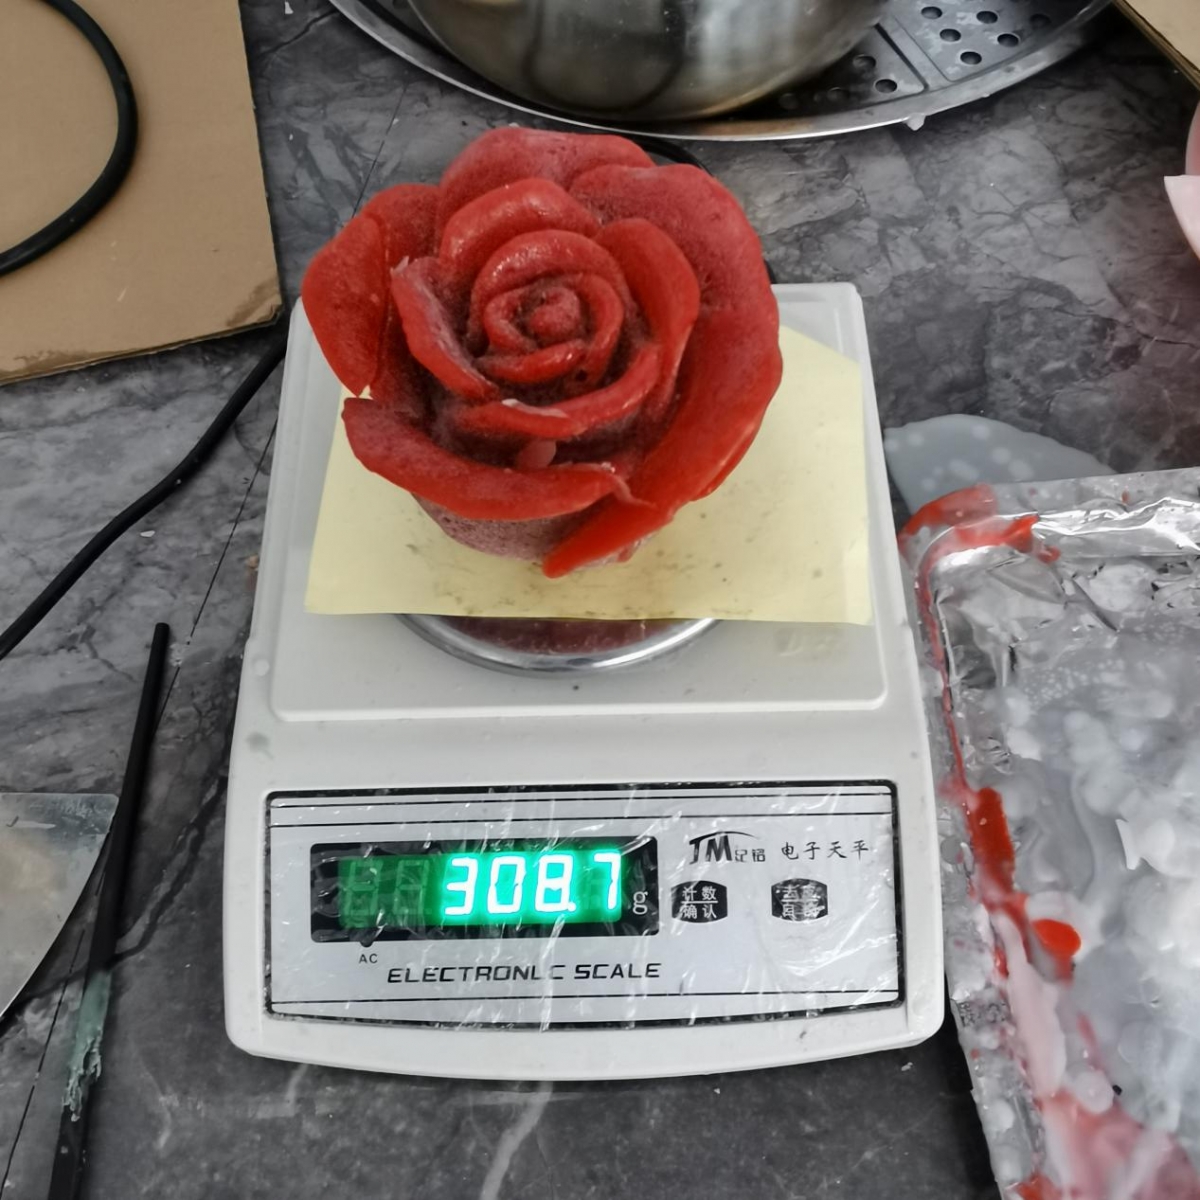 Rosa Chinensis Flower Shaped Candles -Best Soy Wax, Vegan Candles, China Factory ,Price-HOWCANDLE-Candles,Scented Candles,Aromatherapy Candles,Soy Candles,Vegan Candles,Jar Candles,Pillar Candles,Candle Gift Sets,Essential Oils,Reed Diffuser,Candle Holder,